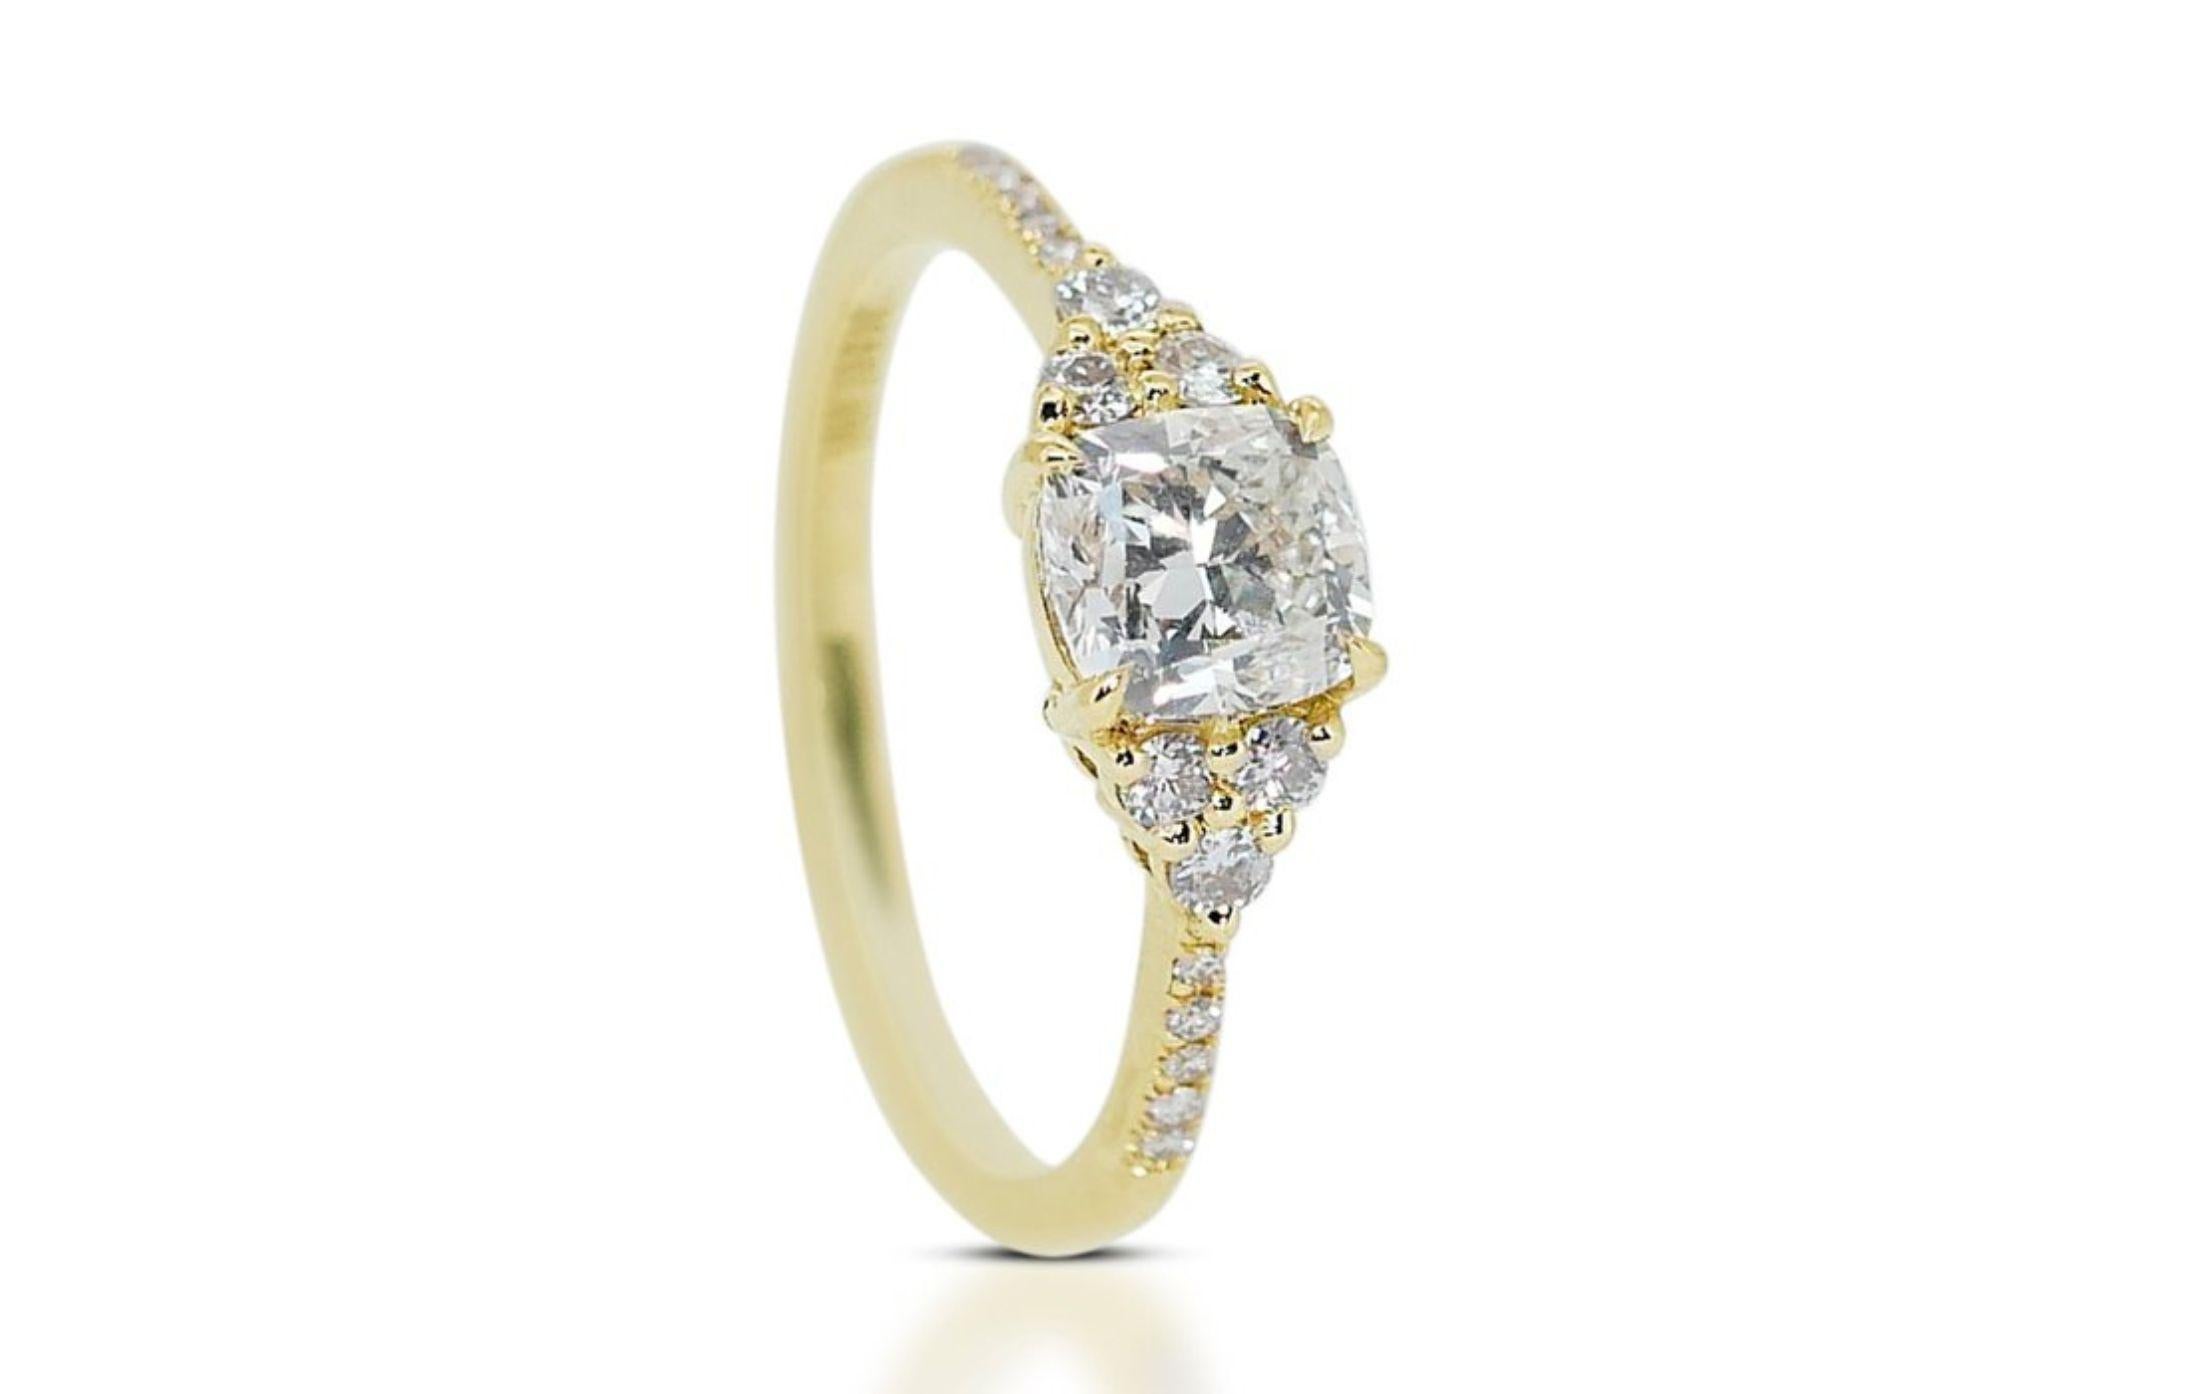 18K Yellow Gold Pave Diamond Ring with a Captivating 1.01ct Cushion-cut Diamond 4